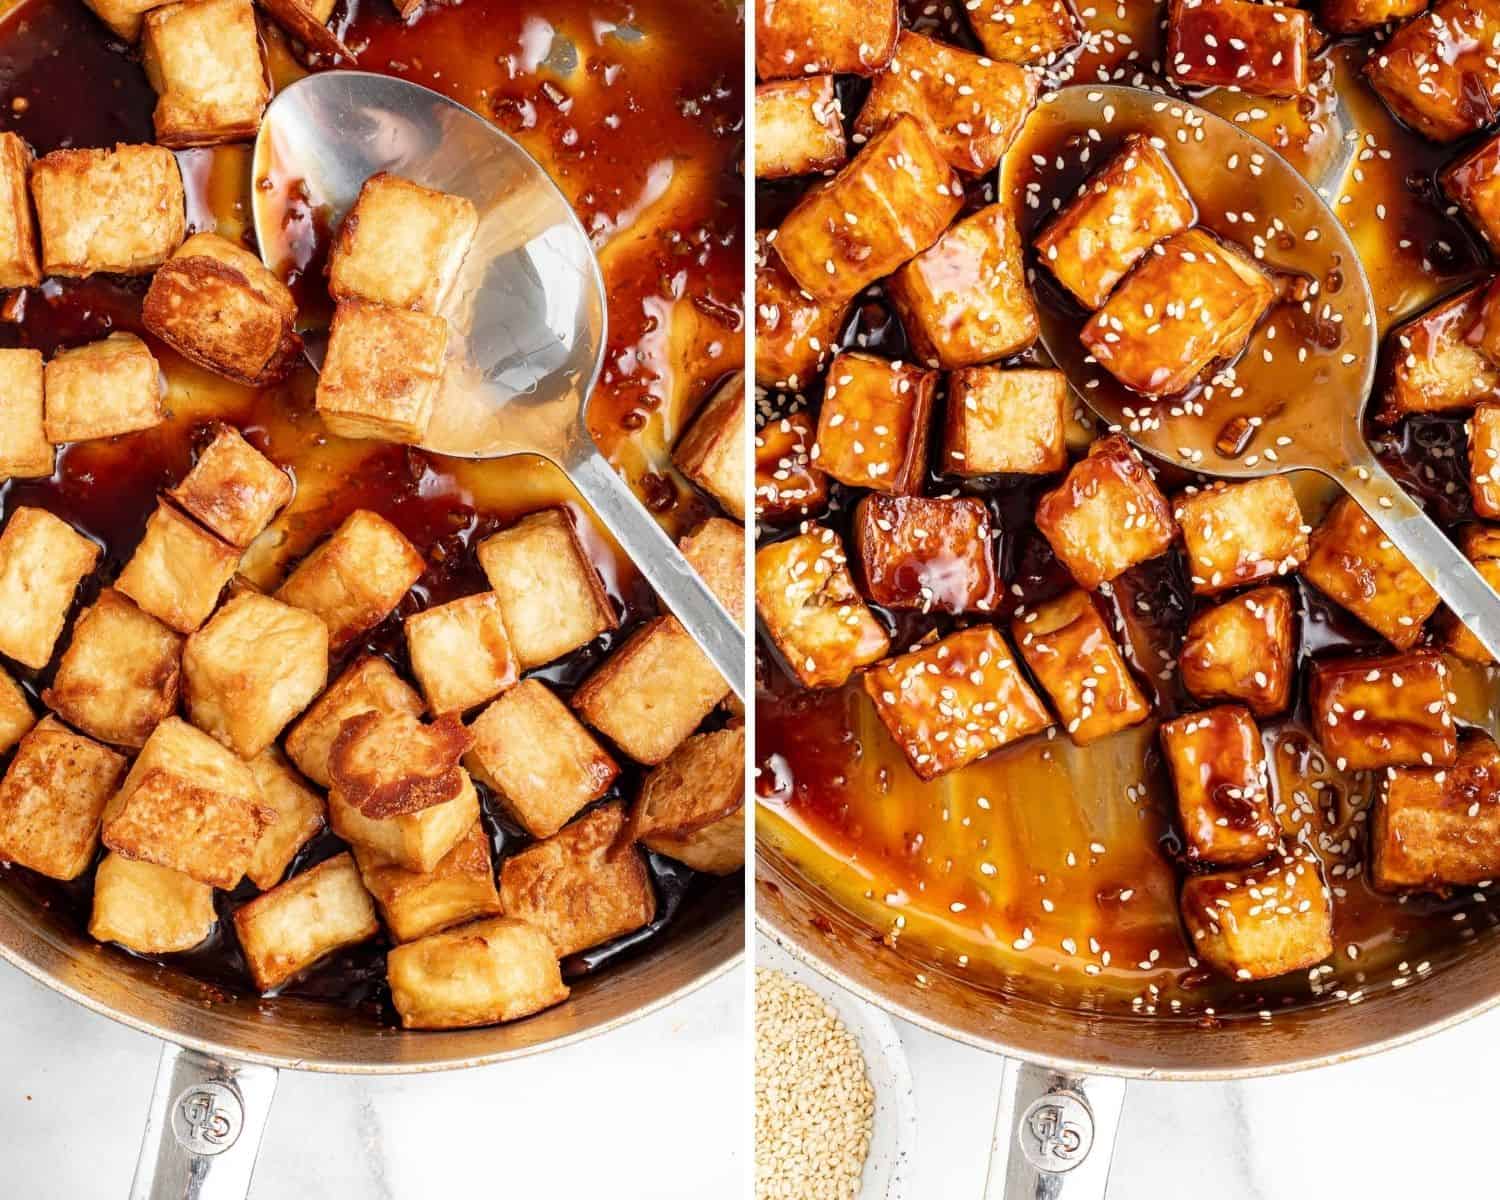 Tofu being tossed with sauce.